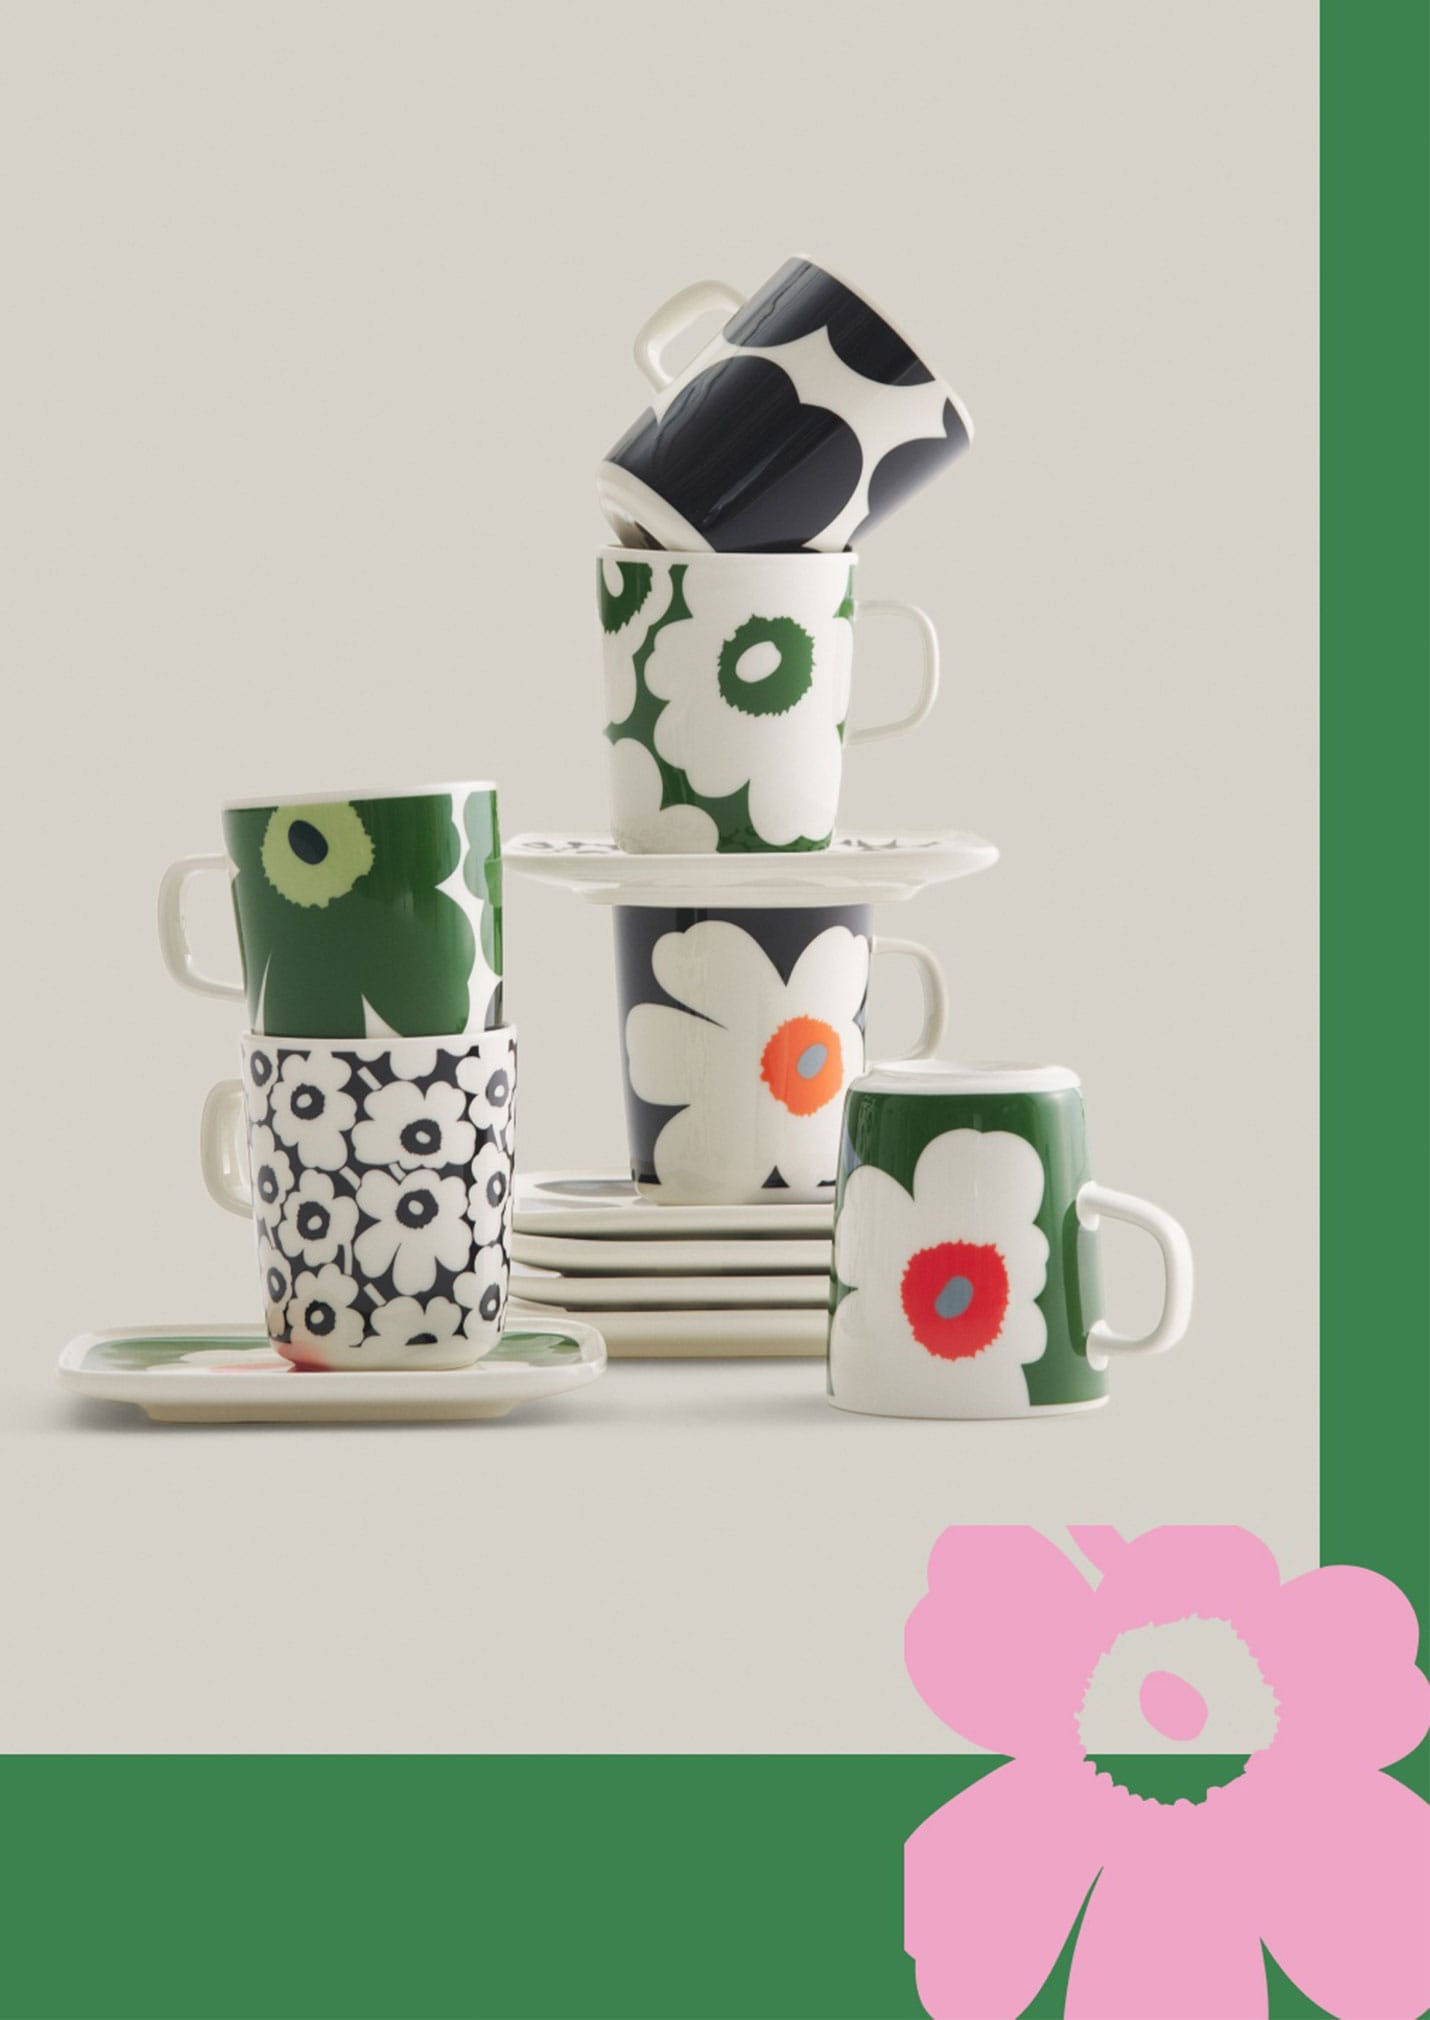 UNIKKO60th Limited-edition collectibles